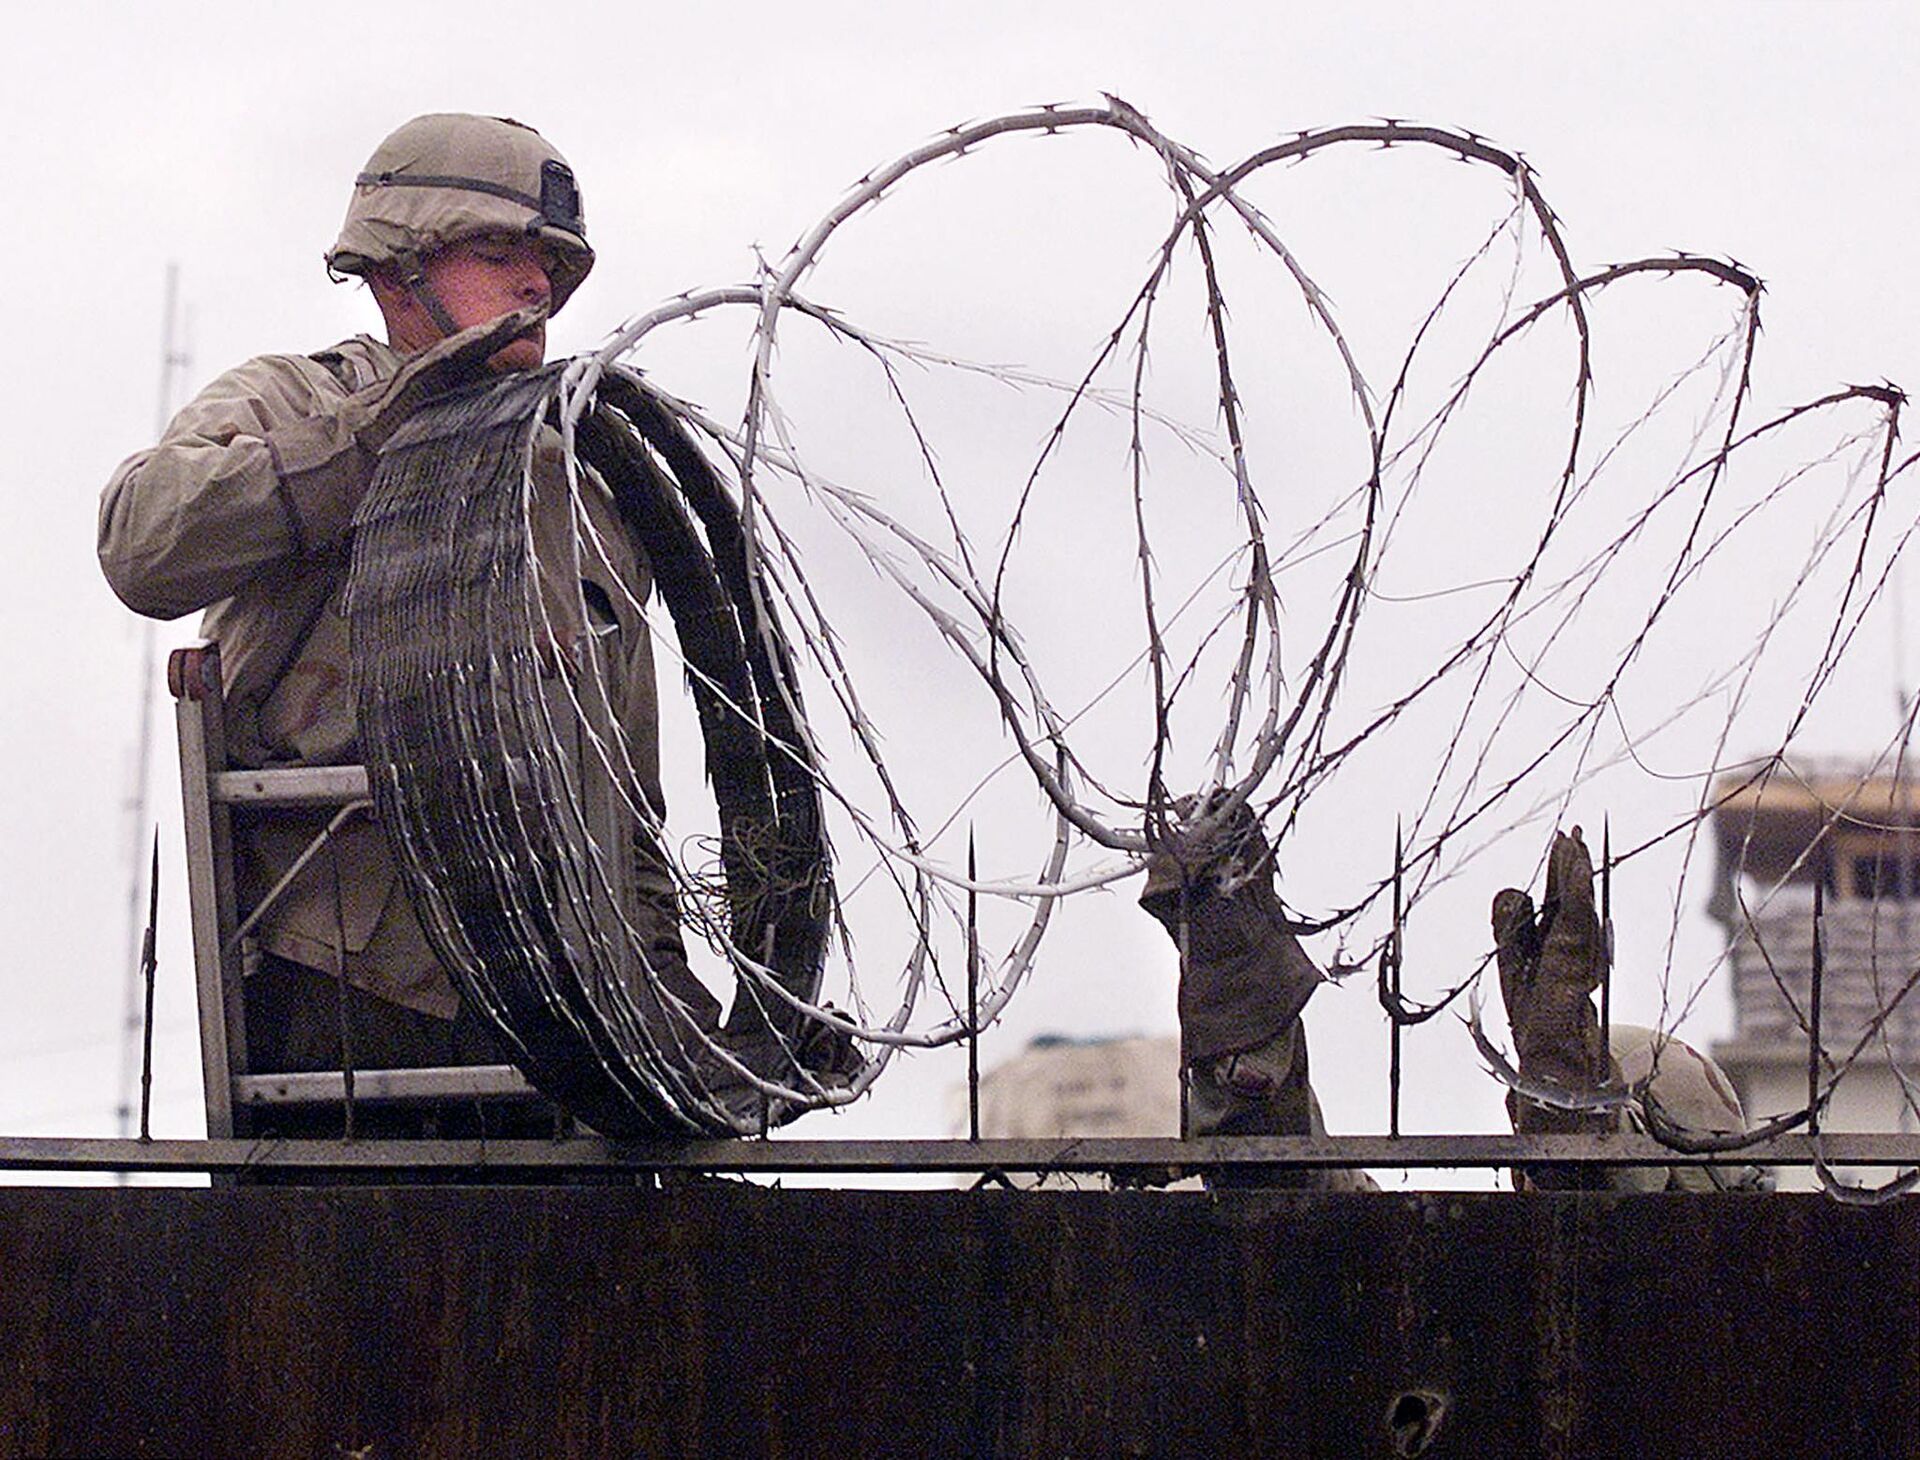  In this file photo a US Marine is given a hand using barbed wire to secure the walls the US embassy in Kabul on January 11, 2002. - The United States said on August 12, 2021 it was sending troops to the international airport in Afghanistan's capital Kabul to pull out US embassy staff as the Taliban makes rapid gains.We are further reducing our civilian footprint in Kabul in light of the evolving security situation, State Department spokesman Ned Price told reporters.This president prioritizes above all else the safety and security of Americans who are serving overseas, he said of Joe Biden, who has ordered a withdrawal of US troops from Afghanistan after nearly 20 years. - Sputnik International, 1920, 07.09.2021